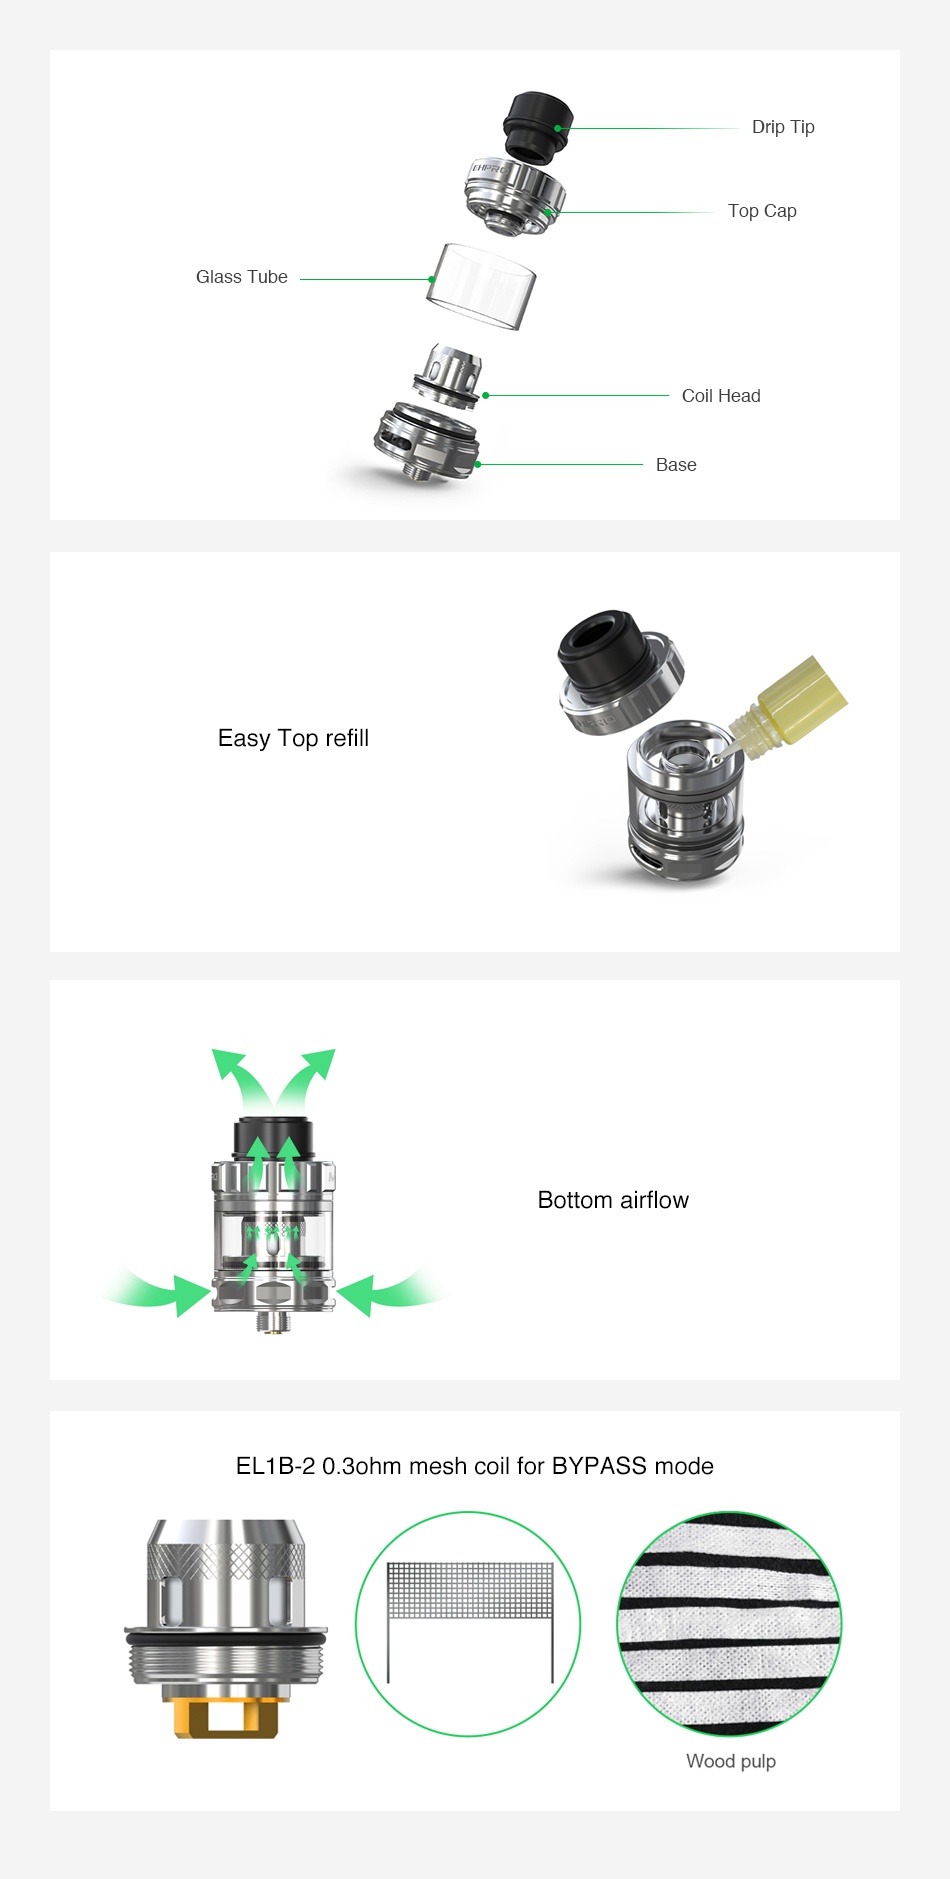 [With Warnings] Ehpro M 101 Subohm Tank 2ml Drip Tip Top Ci Glass Tube Coil Head Base Easy Top refill Ni Bottom airflow EL1B 20 3ohm mesh coil for bypass mode   Wood pulp